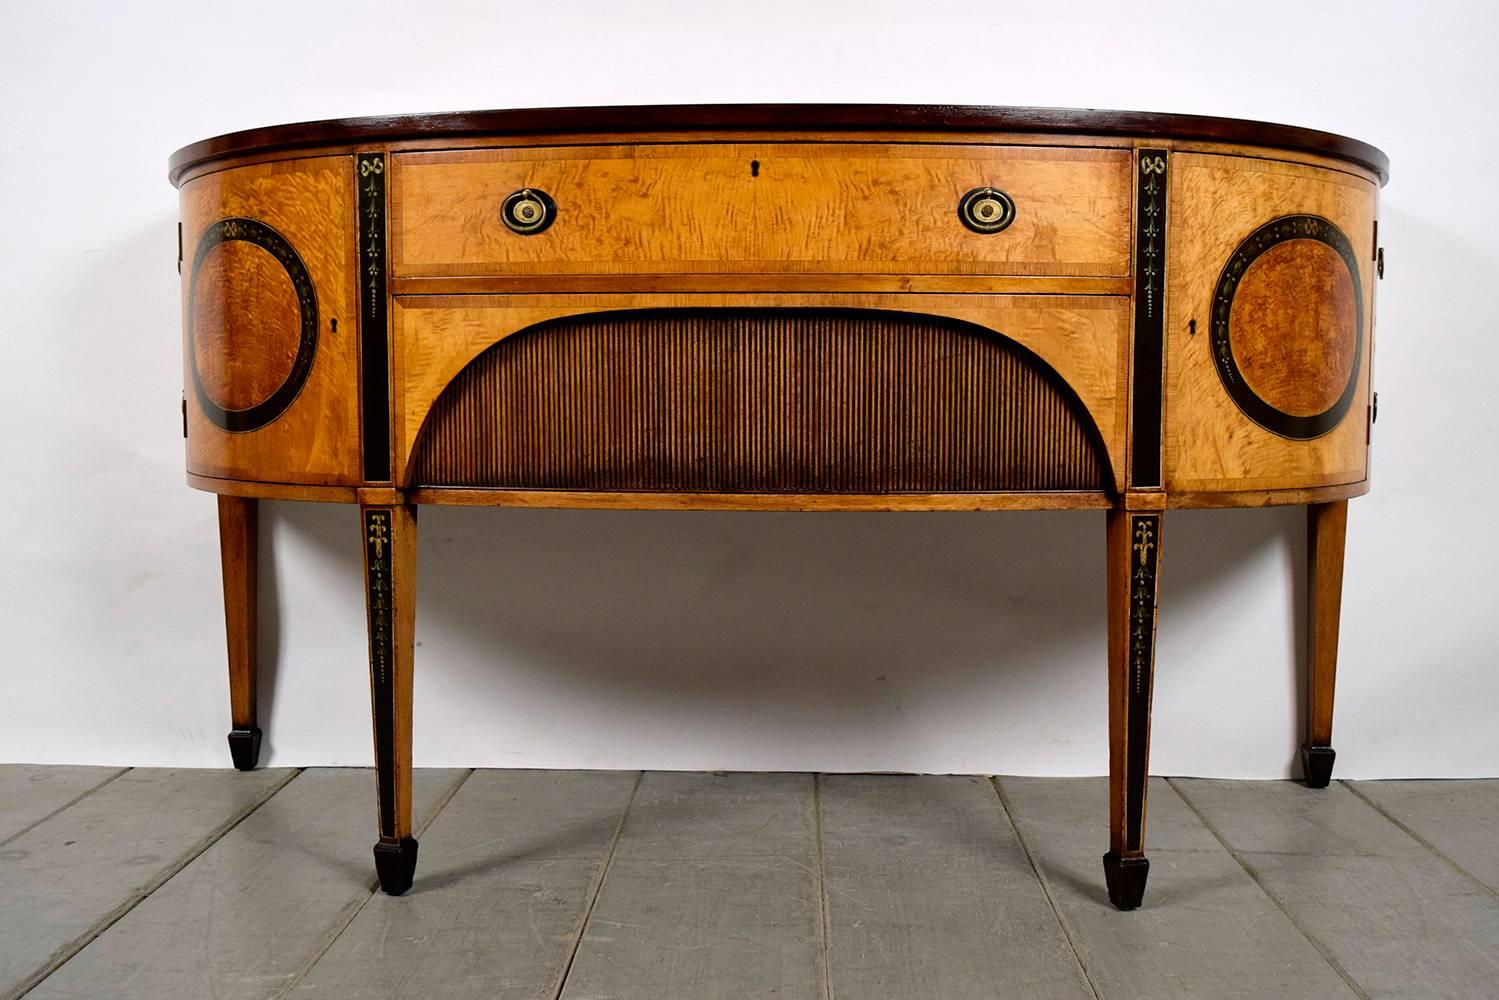 This is an Edwardian-style sideboard made with of solid wood with a stunning and inlaid decorated top. The demilune shape design with burl veneers on the front and sides is unique. The sideboard features two front drawers and two curved side doors.